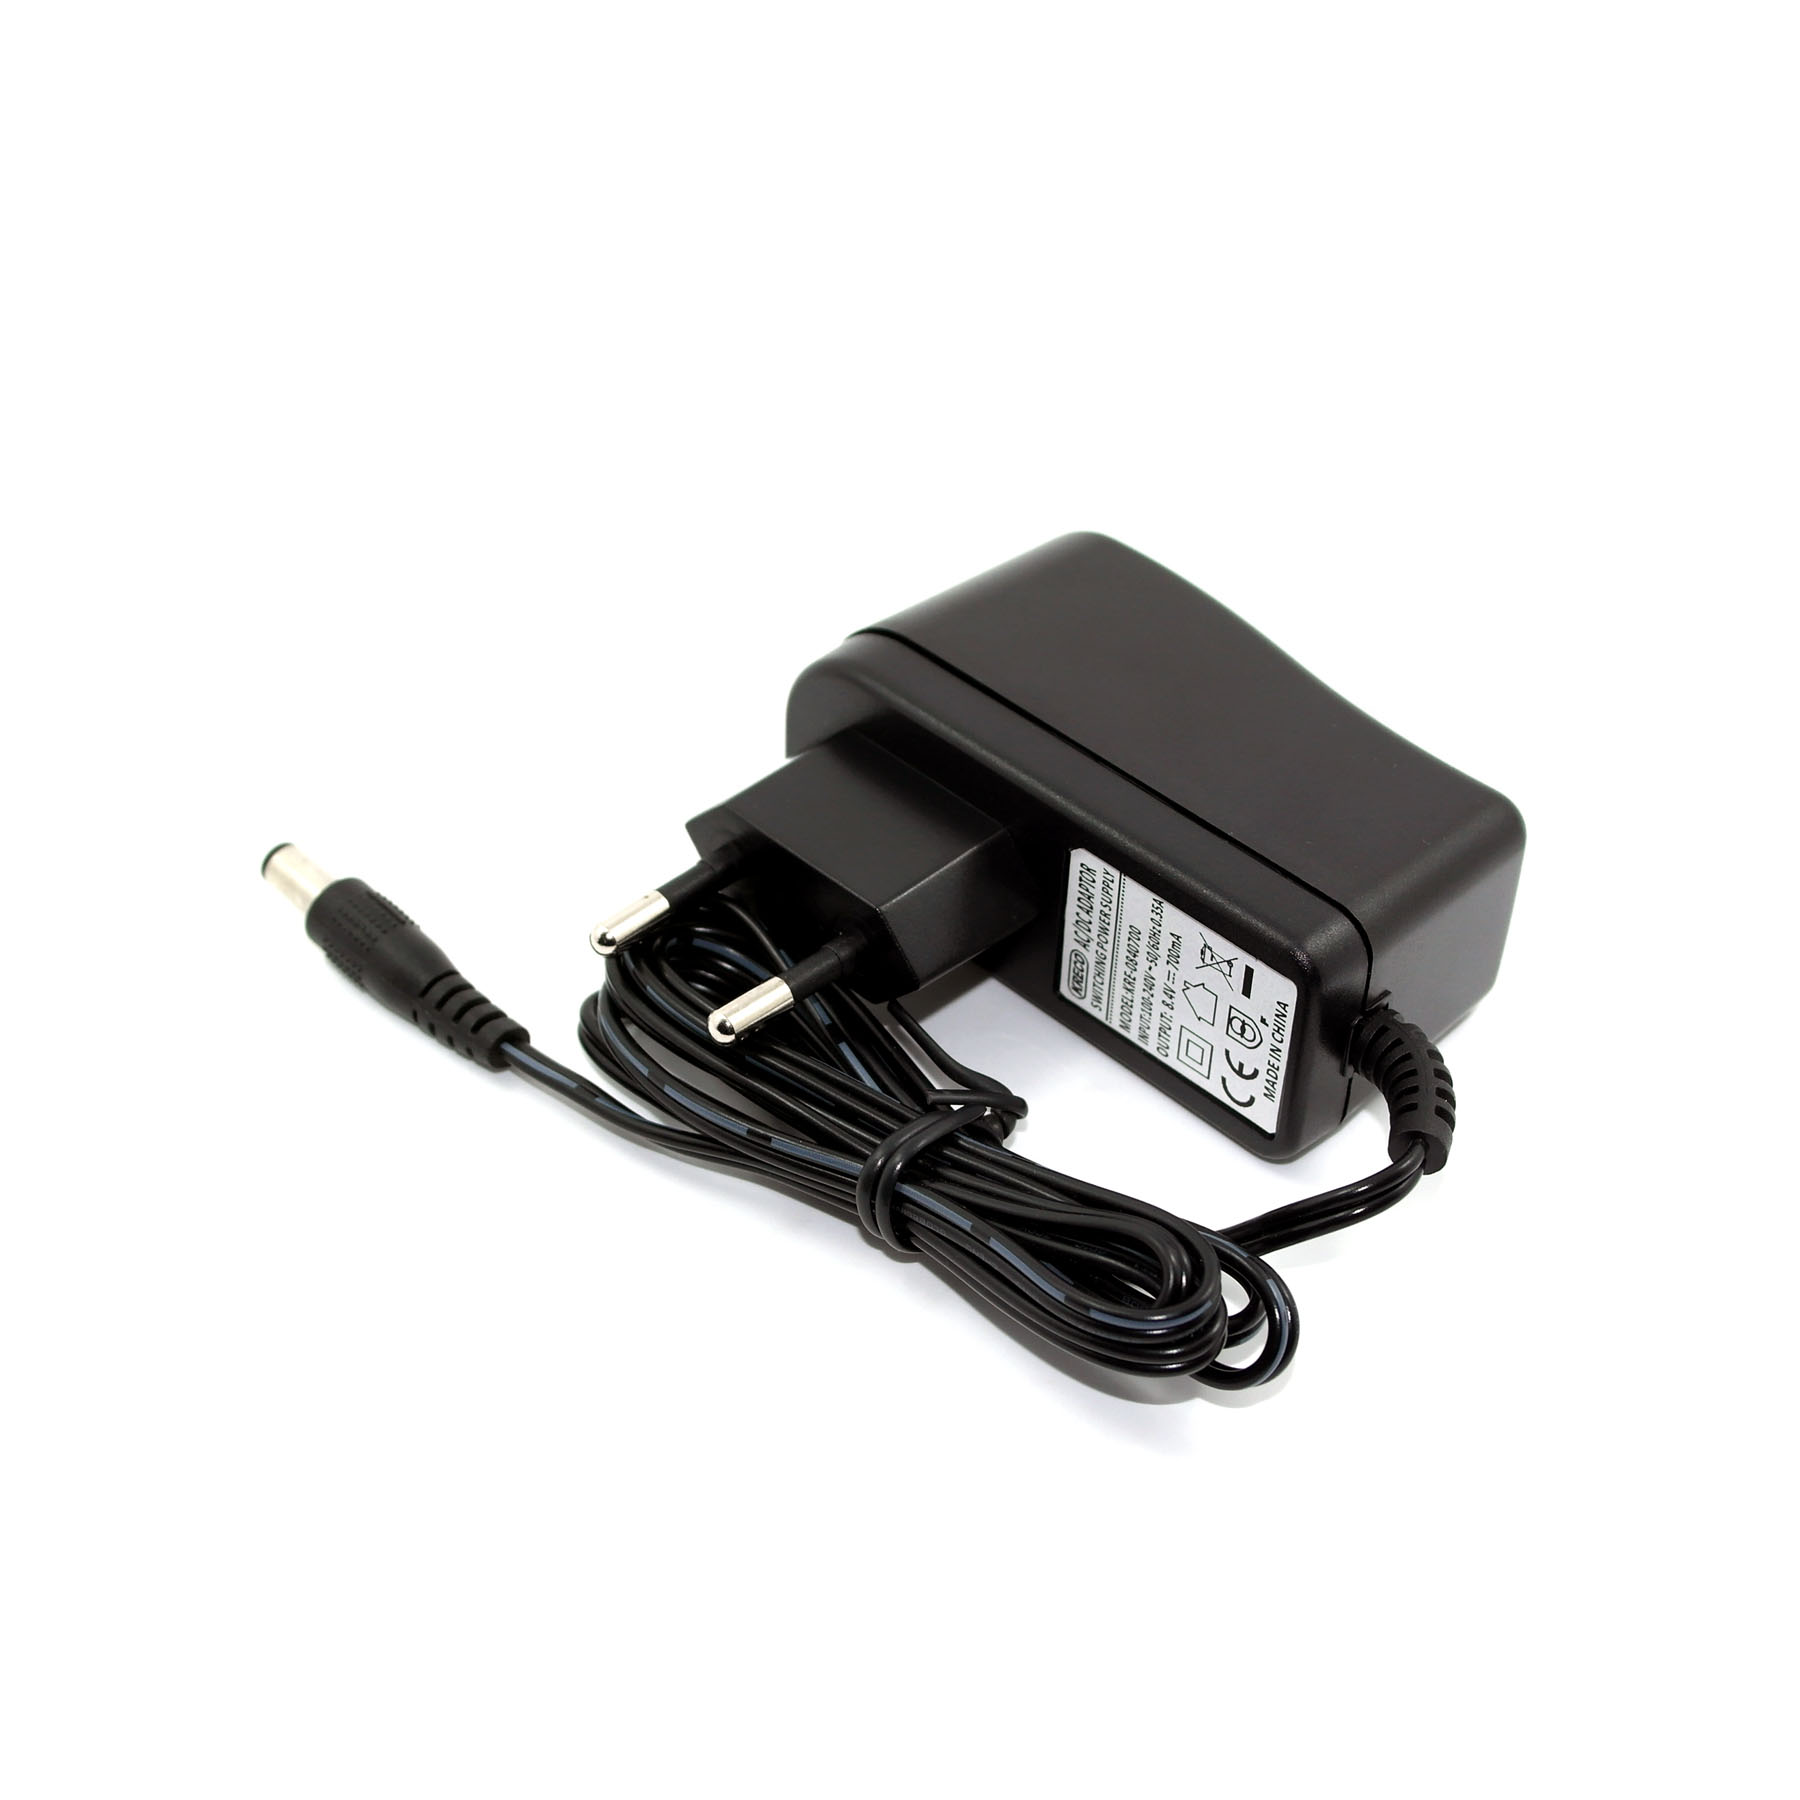 KRE-0840700,8.4V 0.7A 5.88W travel charger